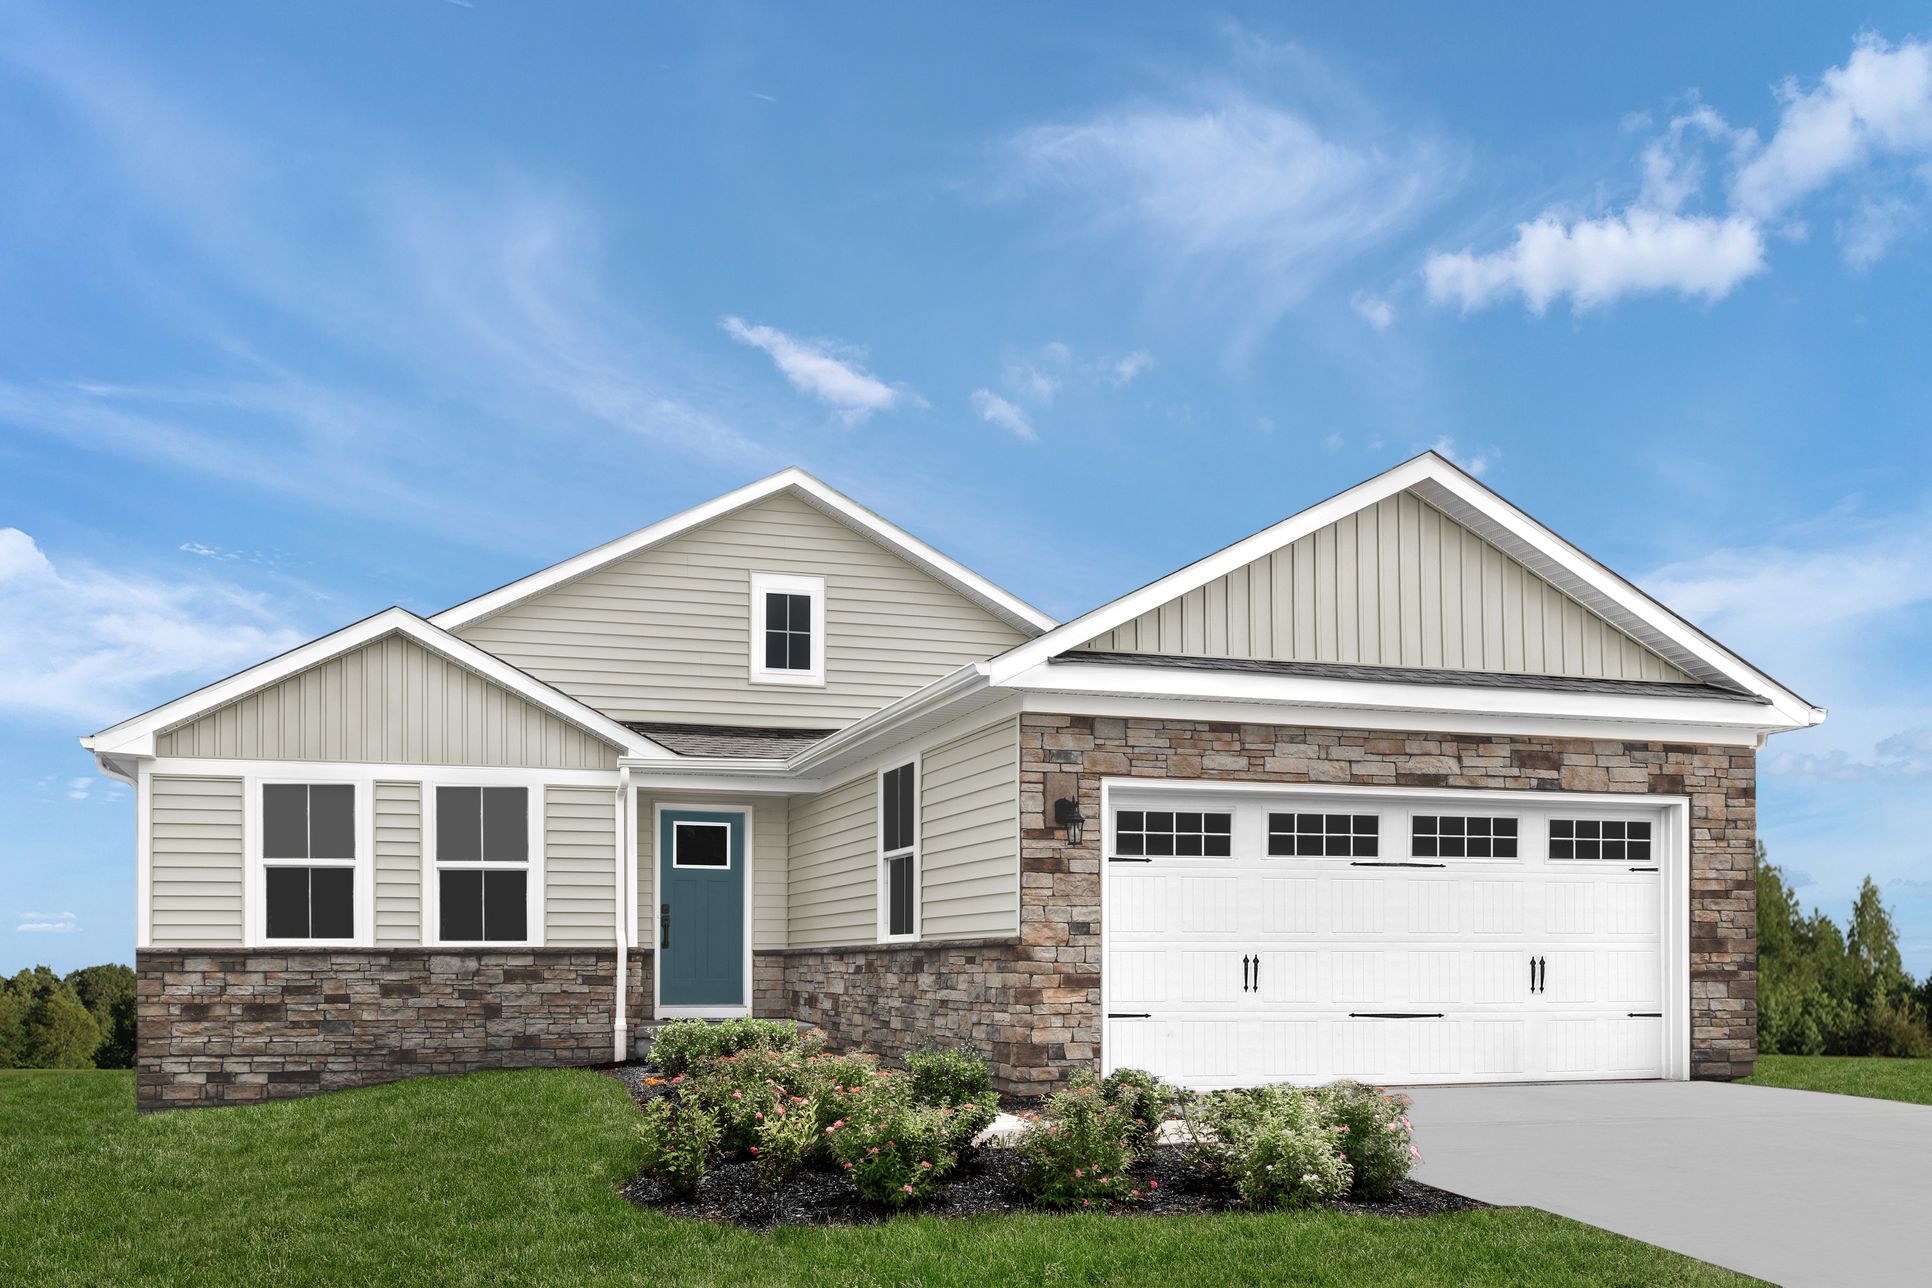 Brandywine Villas - Most affordable ranch homes in Greenfield